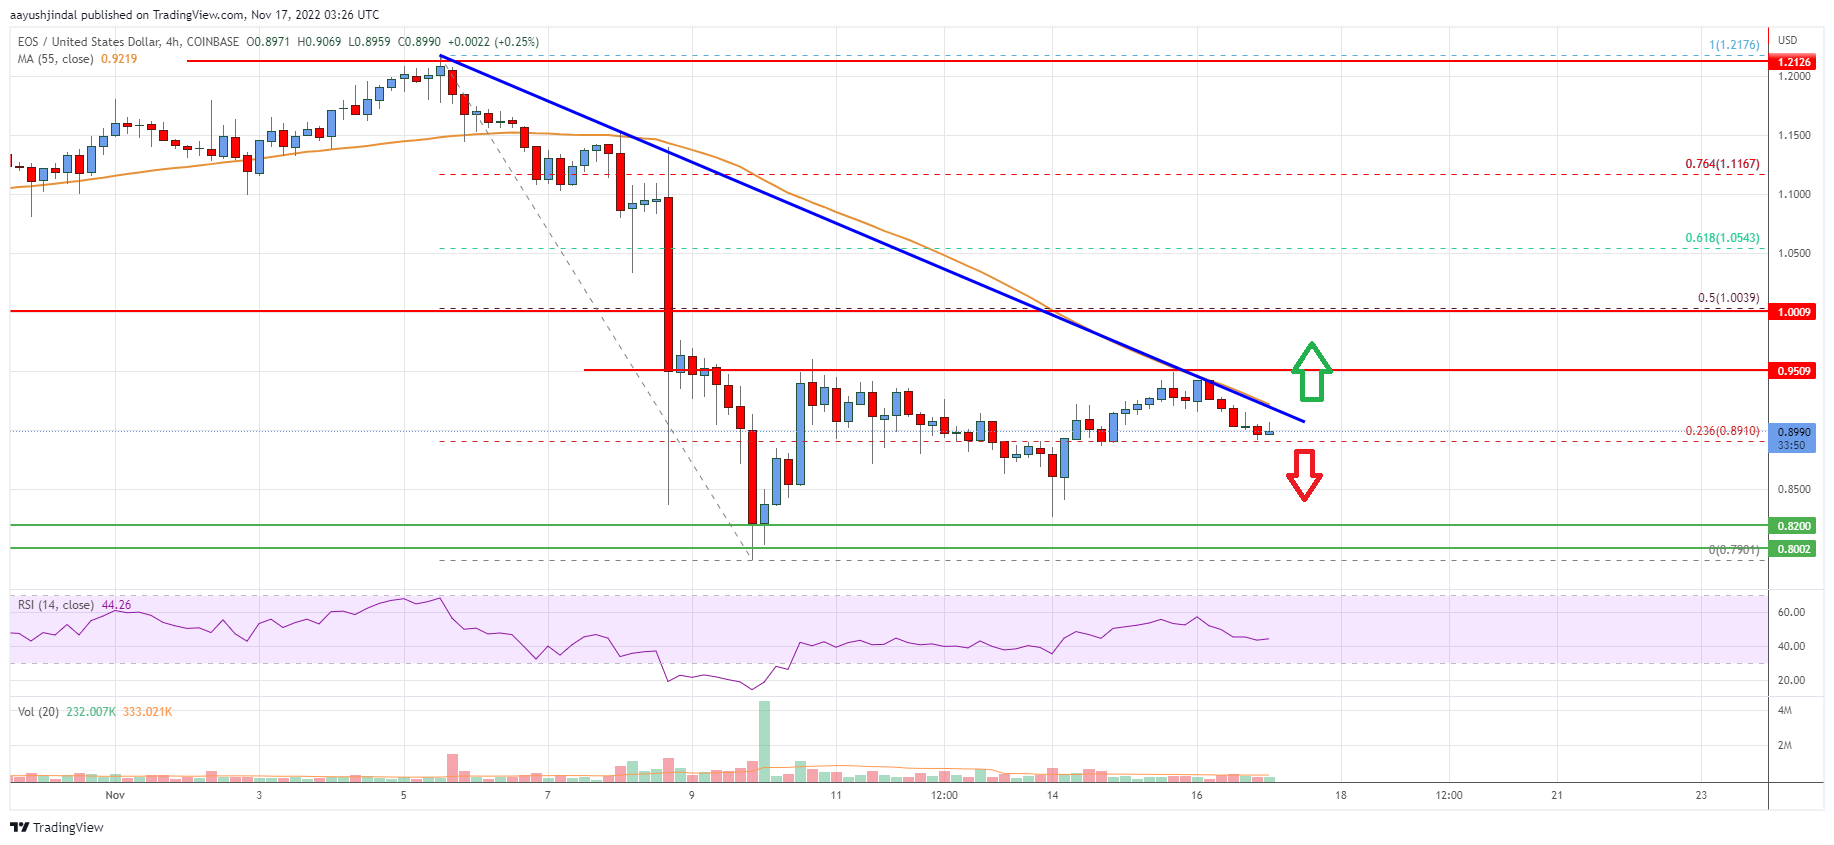 EOS Price Analysis: Risk of More Losses Below $0.8